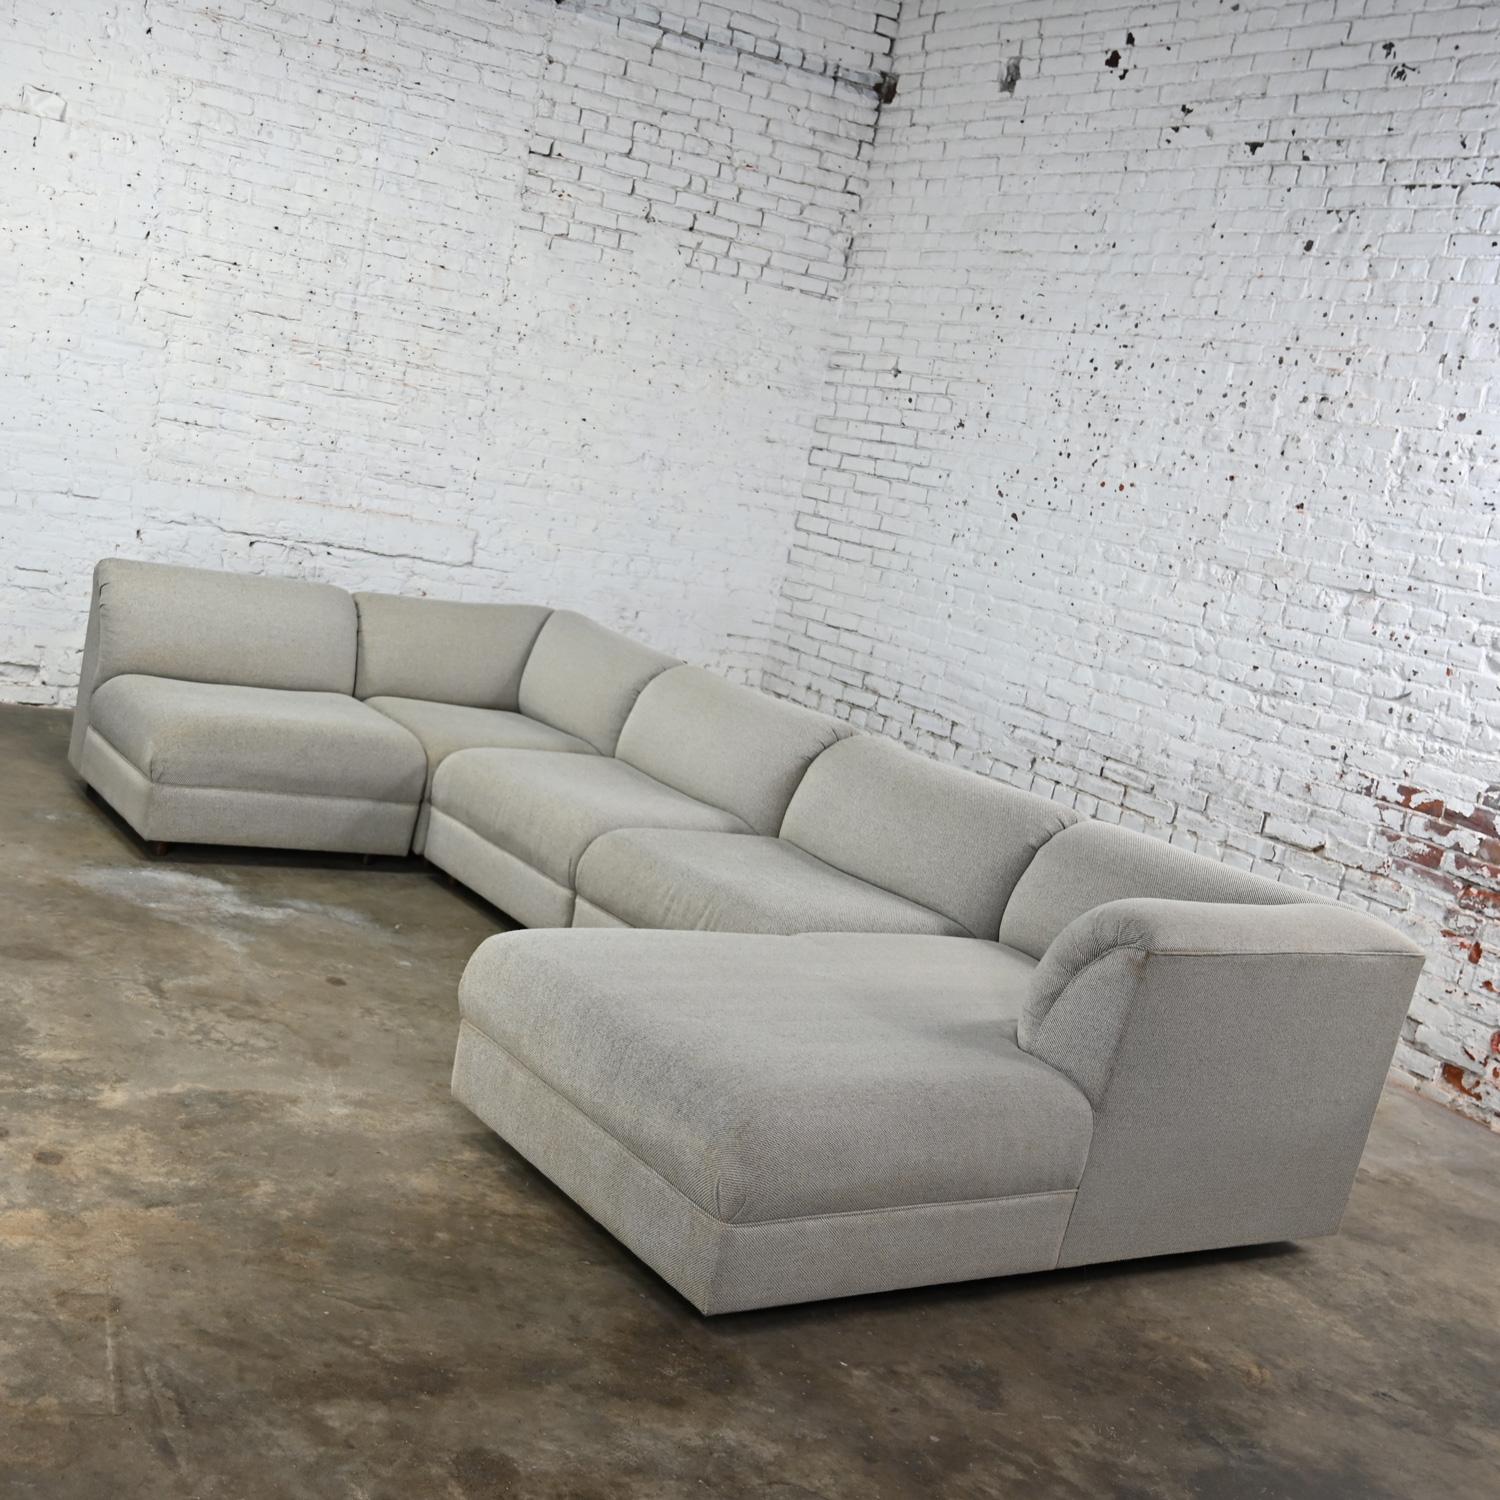 Late 20th Century Modern Modular Sectional Sofa 5 Pieces with Chaise Gray Tweed  For Sale 6